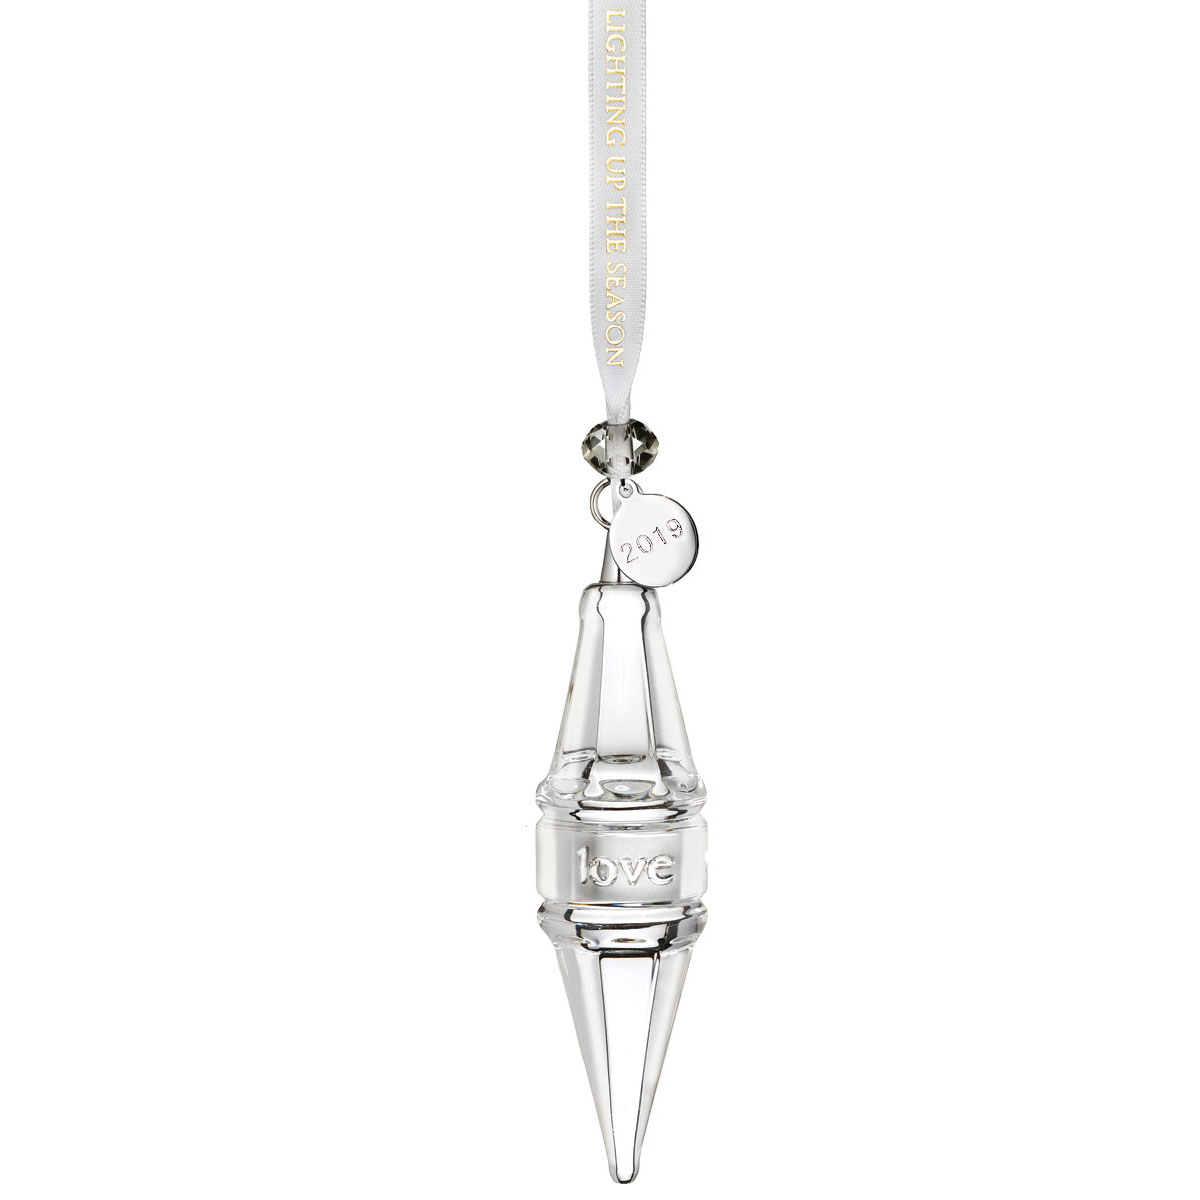 Waterford Crystal 2019 Ogham Love Icicle Ornament